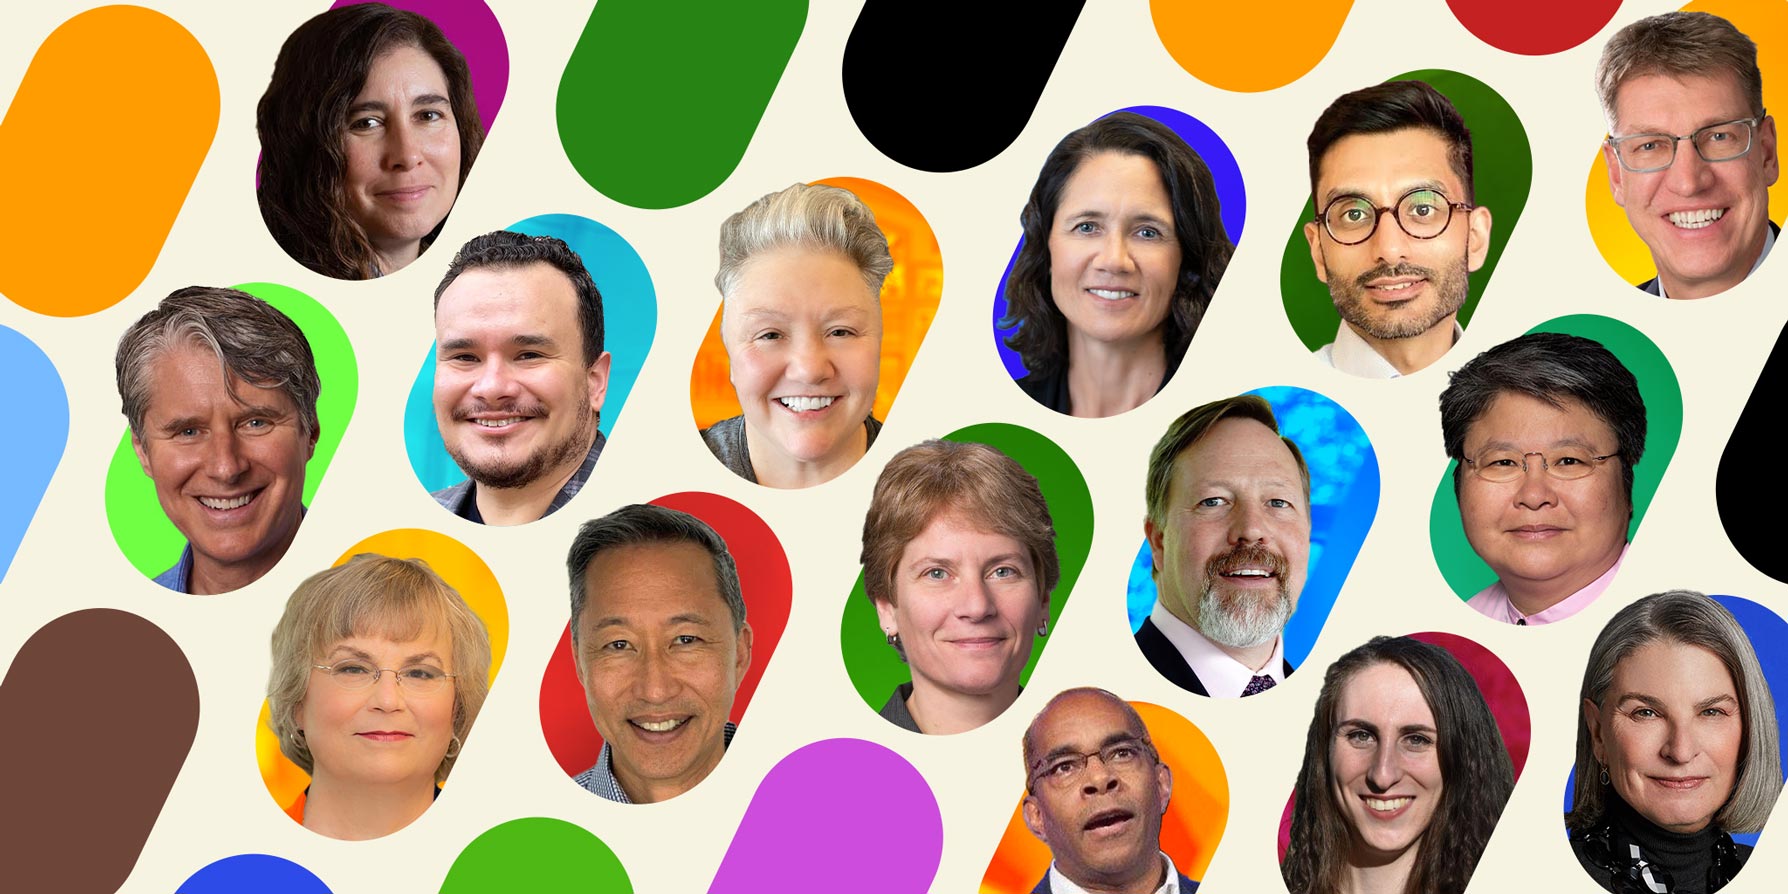 15 leaders giving voice and visibility to the LGBTQ community in biopharma